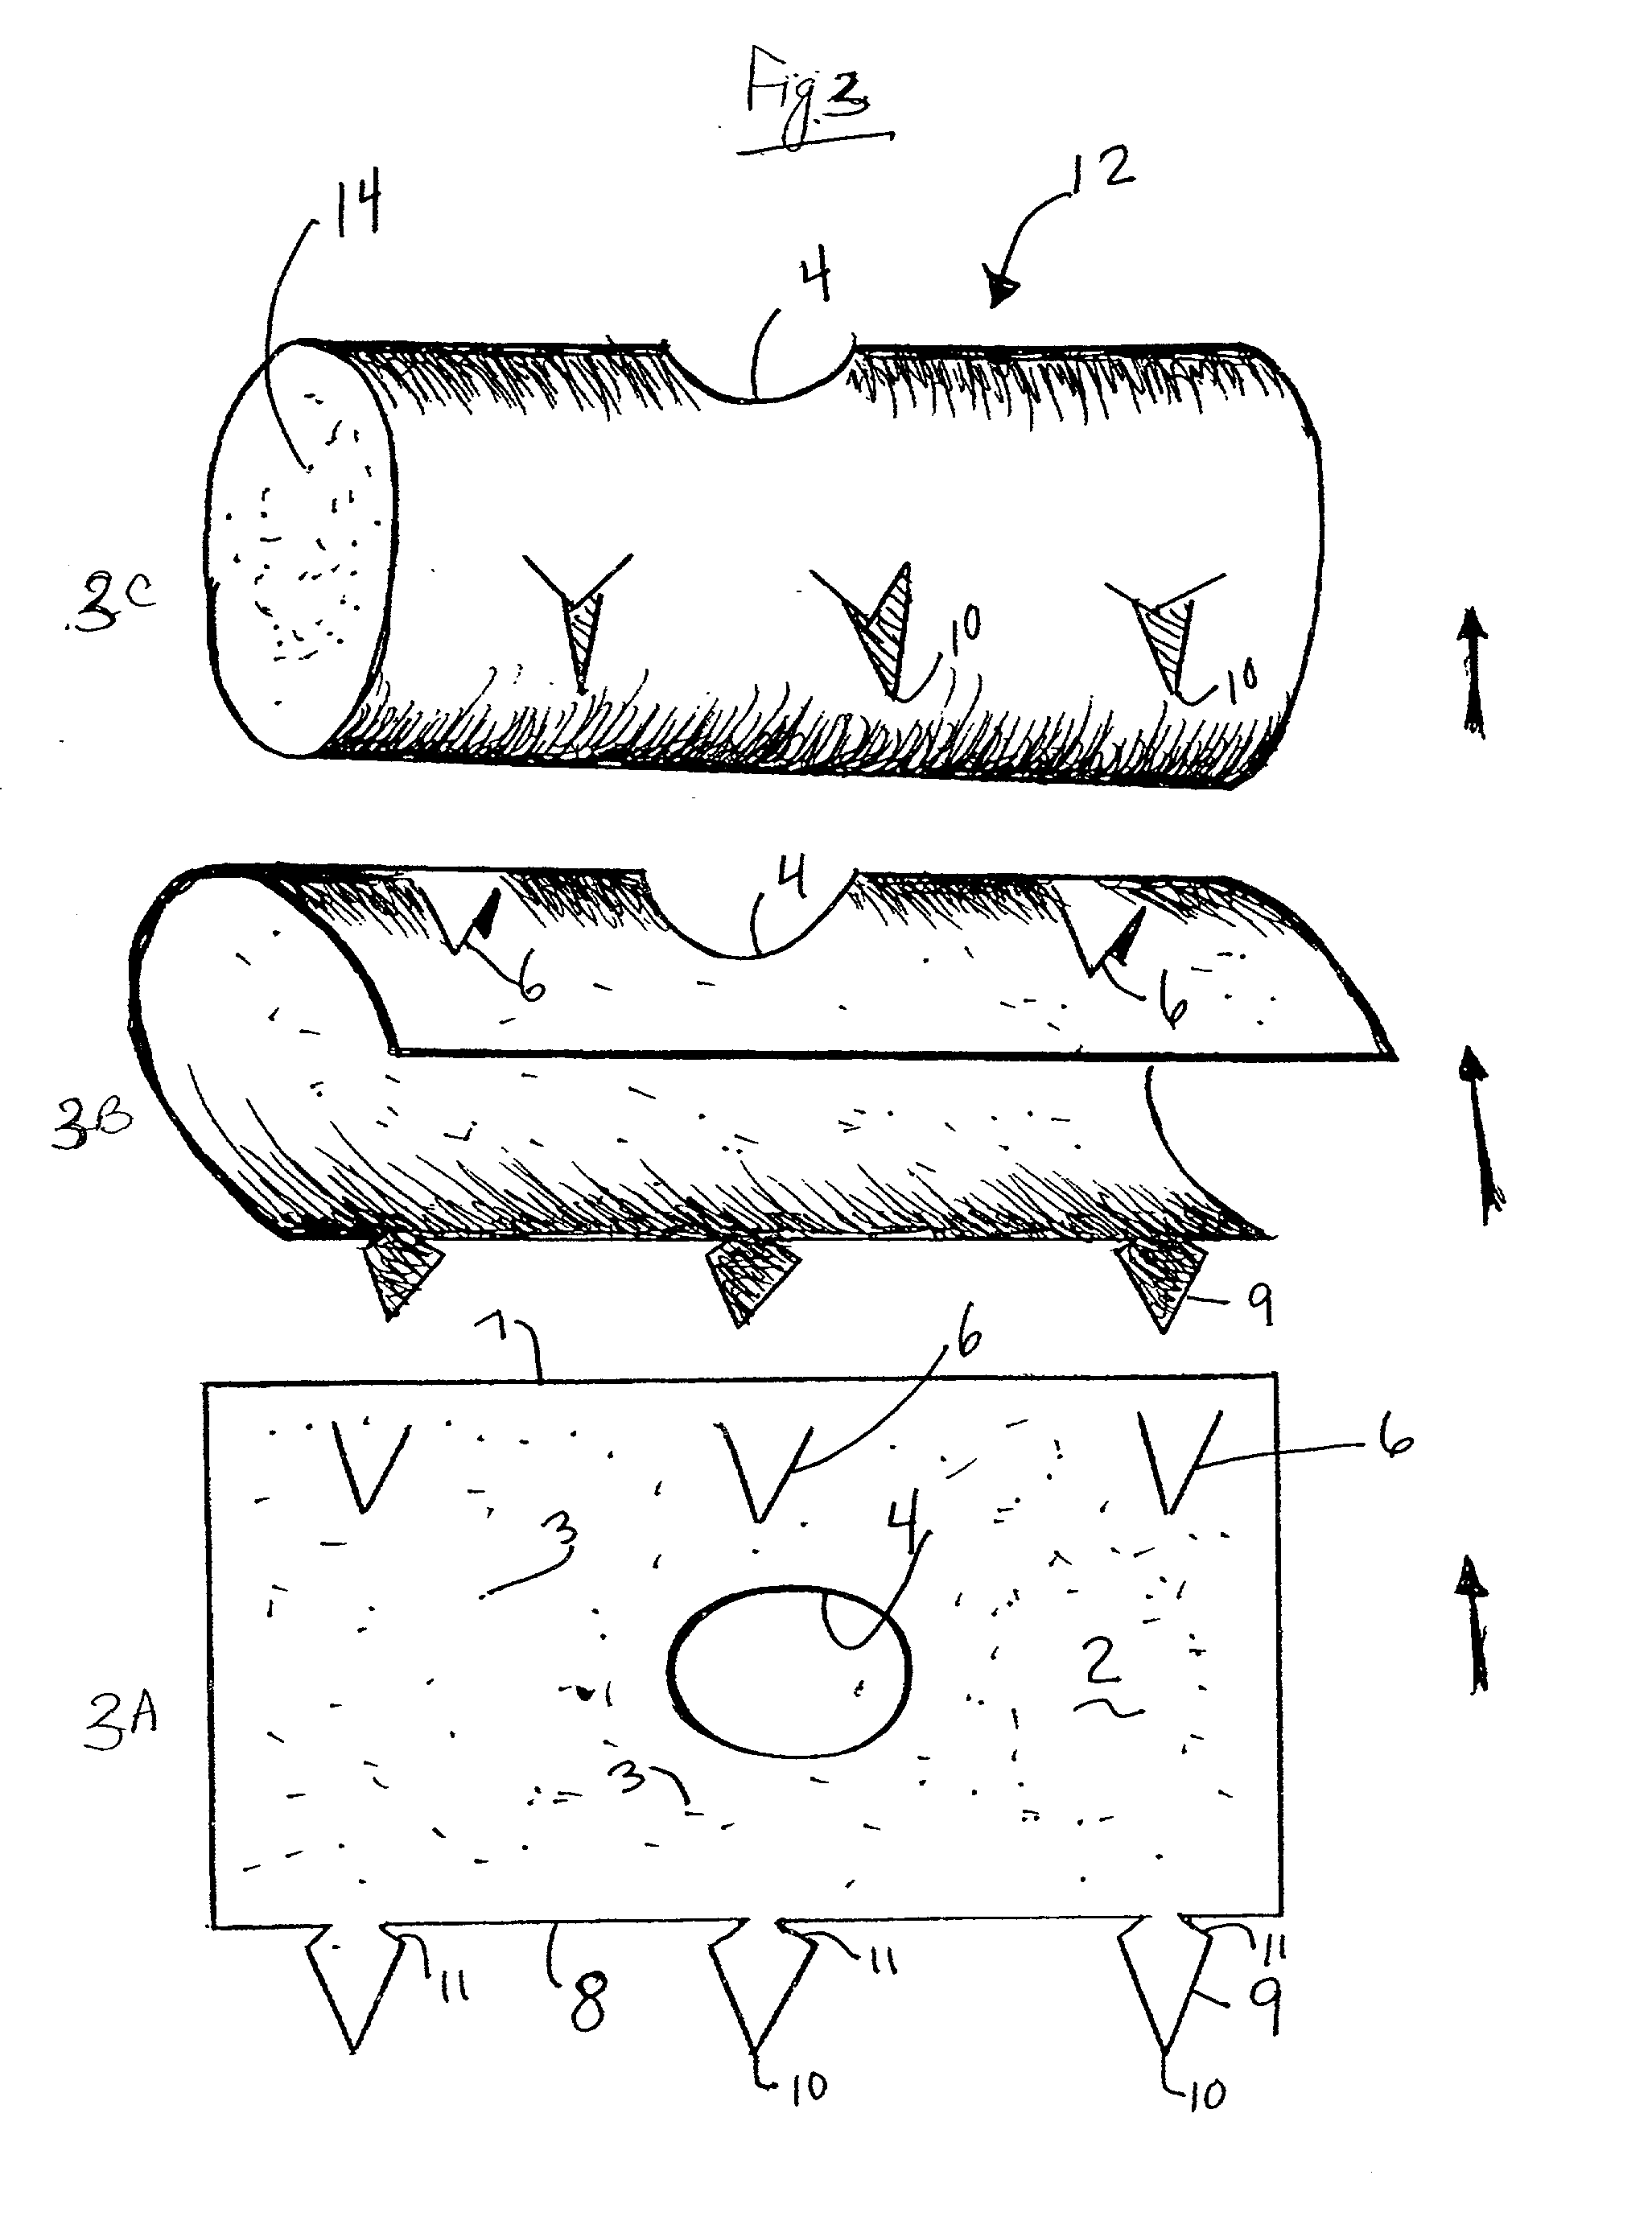 Apparatus and methods for preventing or treating failure of hemodialysis vascular access and other vascular grafts